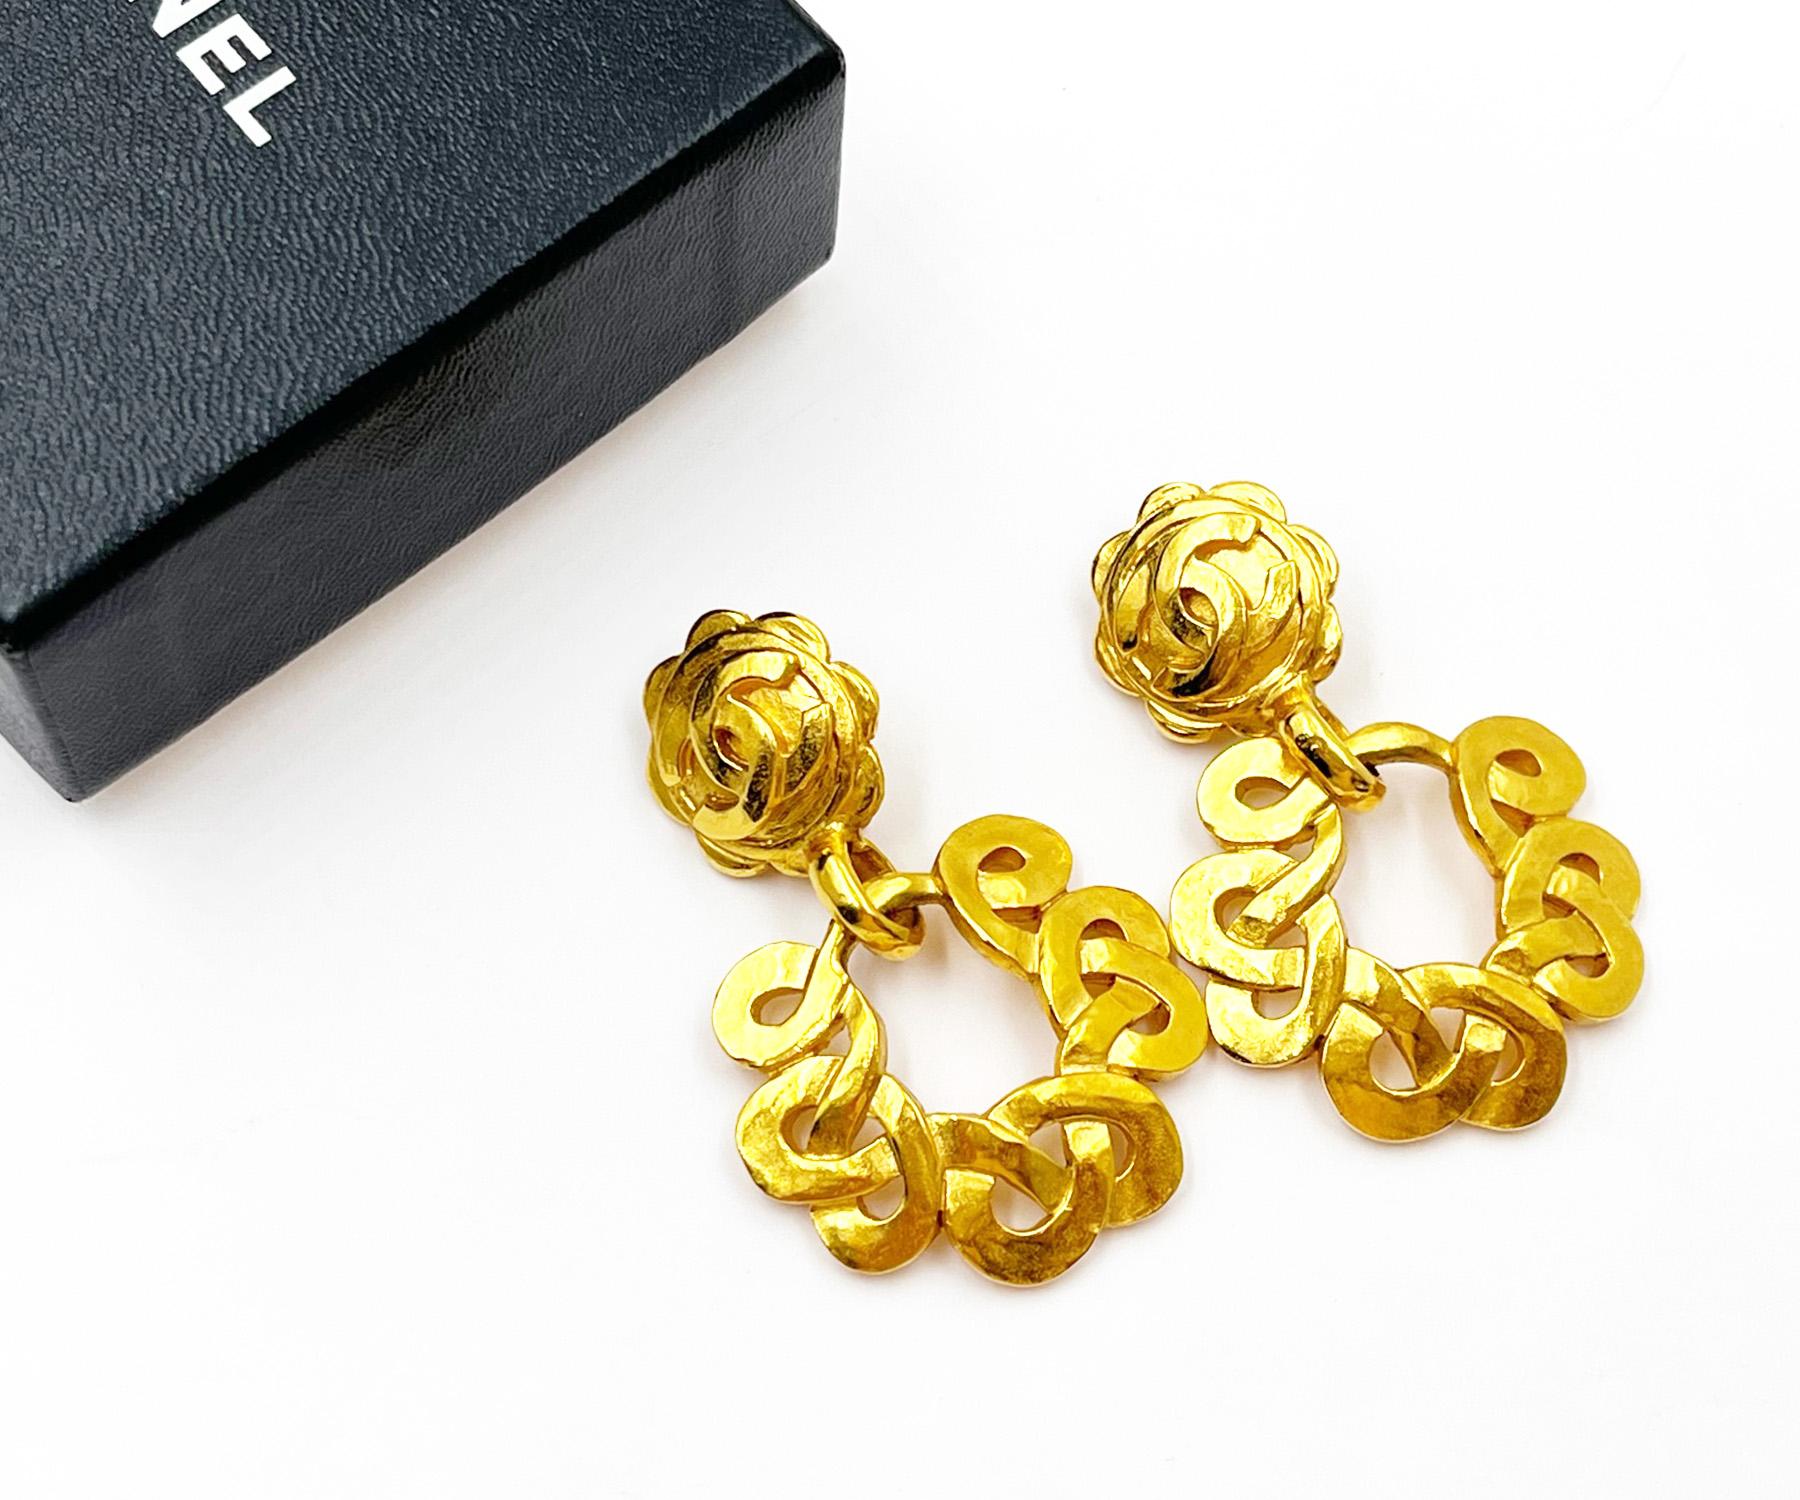 Chanel Vintage Gold Plated CC Flower Twisted Round Clip on Earrings

* Marked 97
* Made in France
* Comes with the original box

- It is approximately 2.1